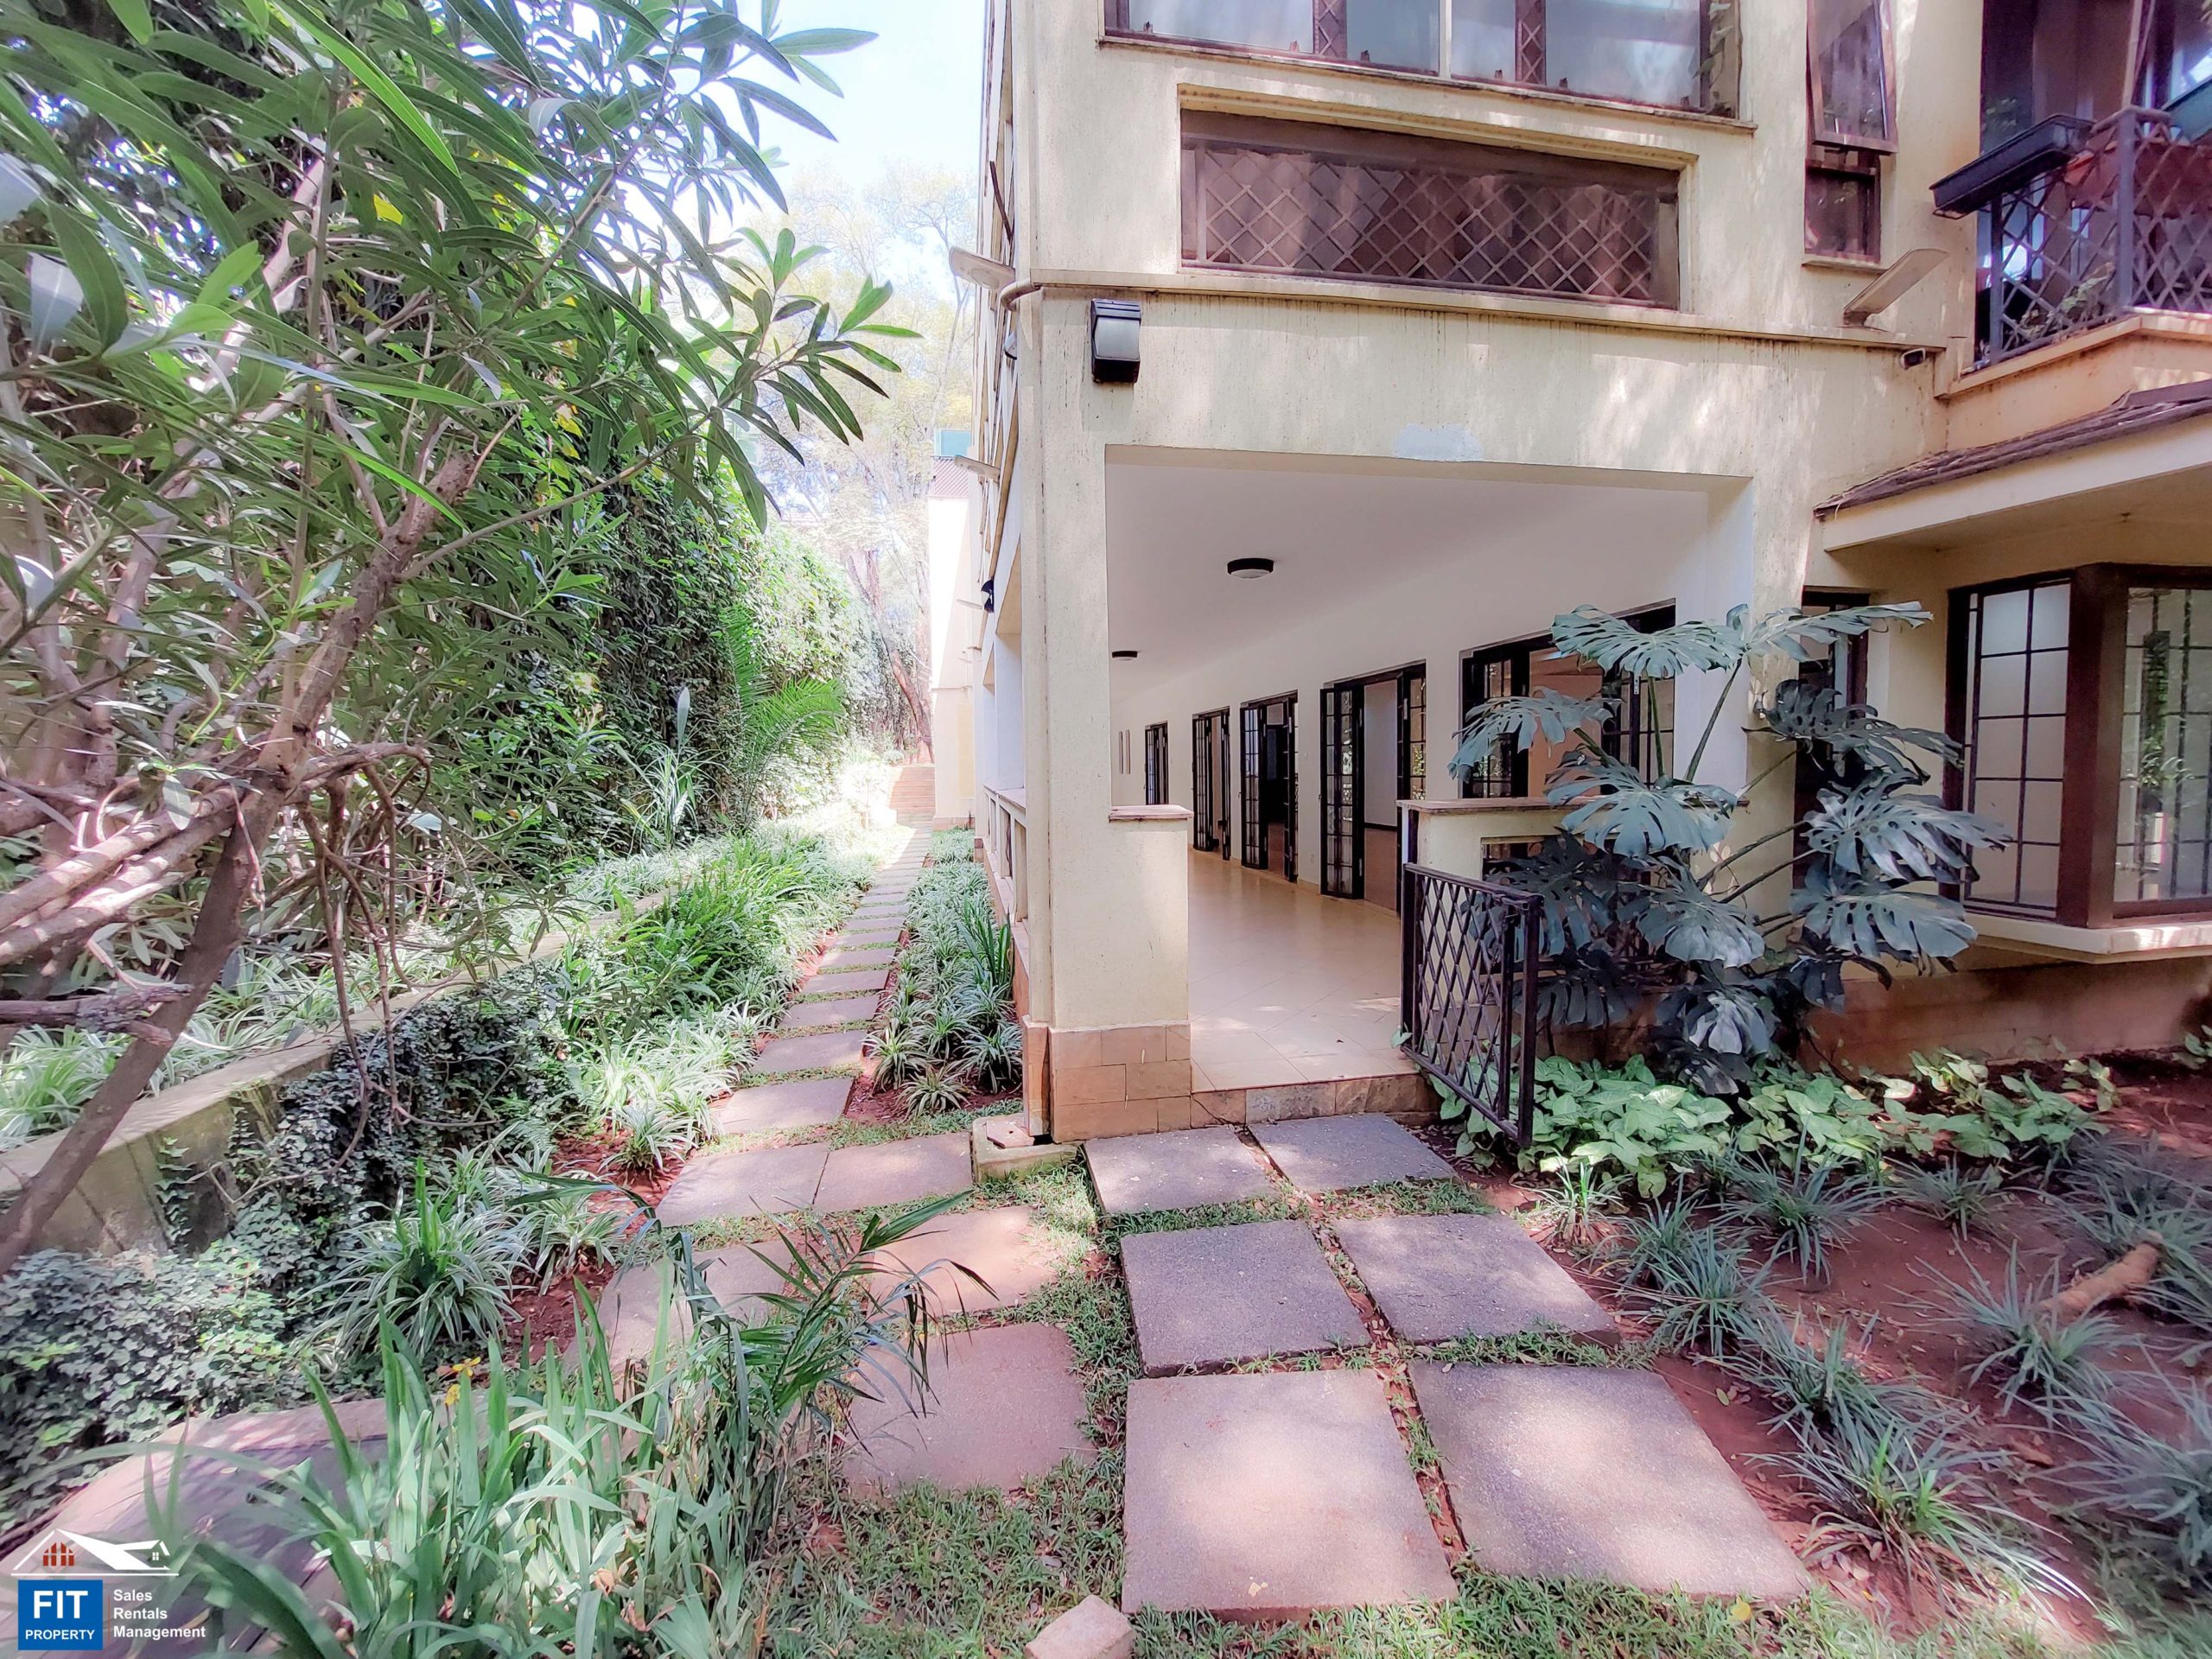 The Riverside 4 bed for rent, 4 bed for sale Riverside Drive, Nairobi. FIT PROPERTY